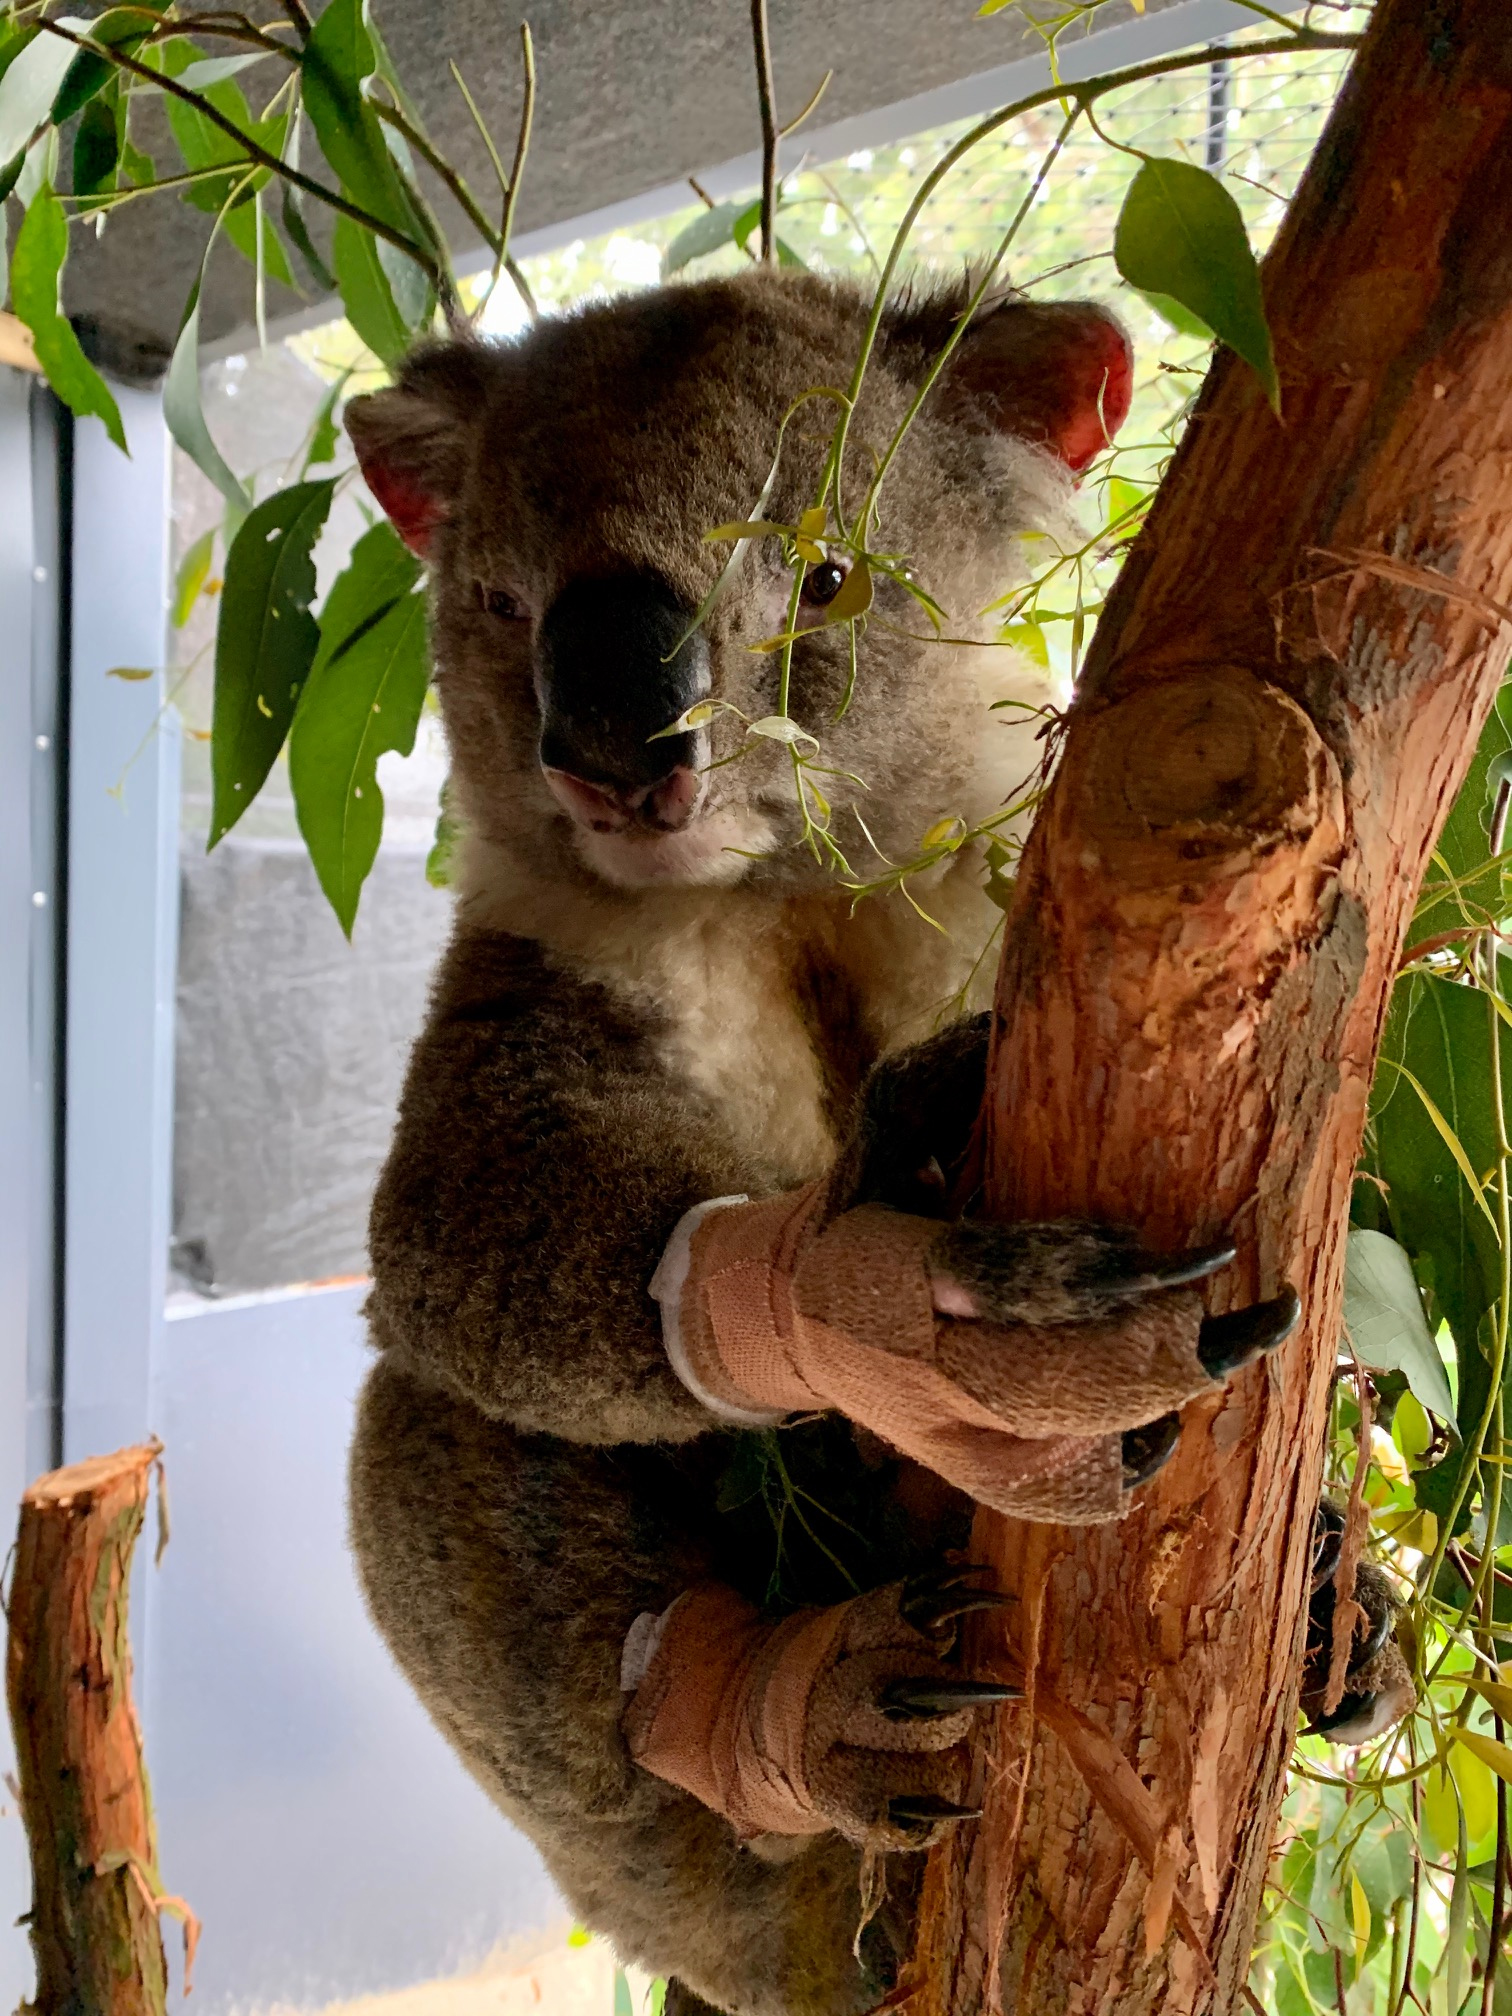 roger the rescued koala at zoos victoria who sustained burns on his paws from the AU wildfires